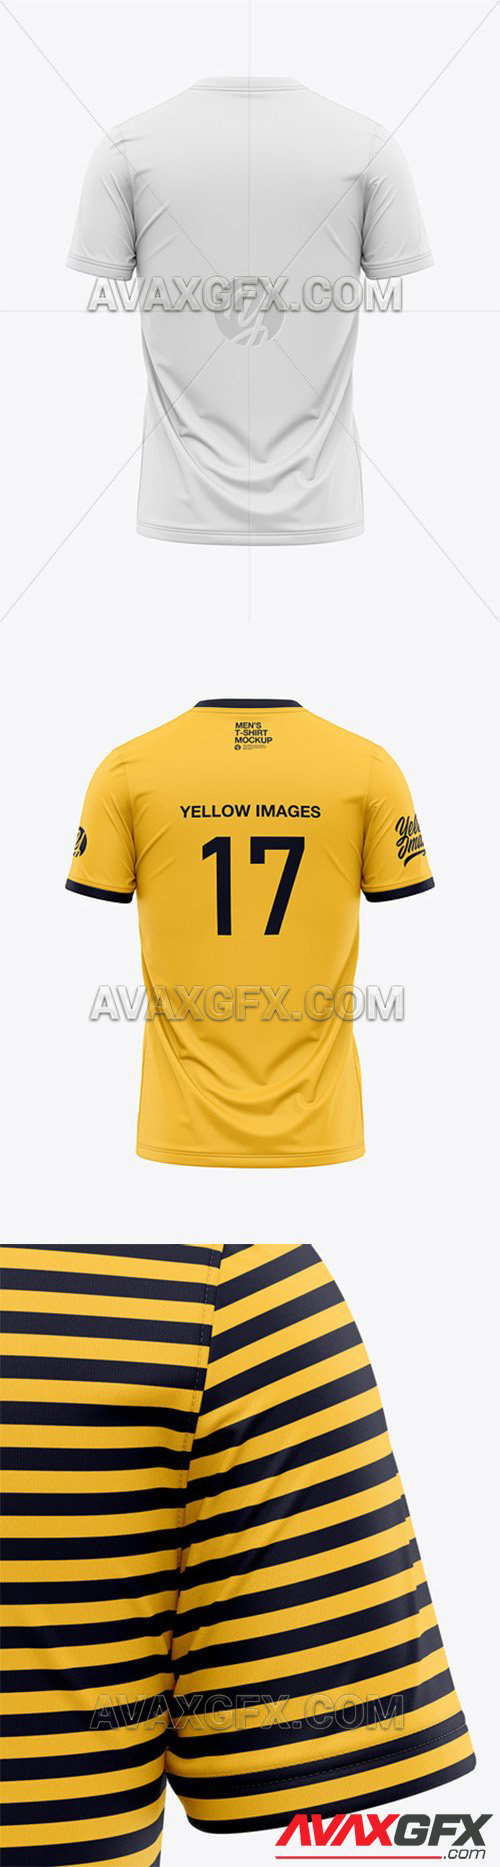 Download Get Mens Lace Neck Hockey Jersey Mockup Back View ...